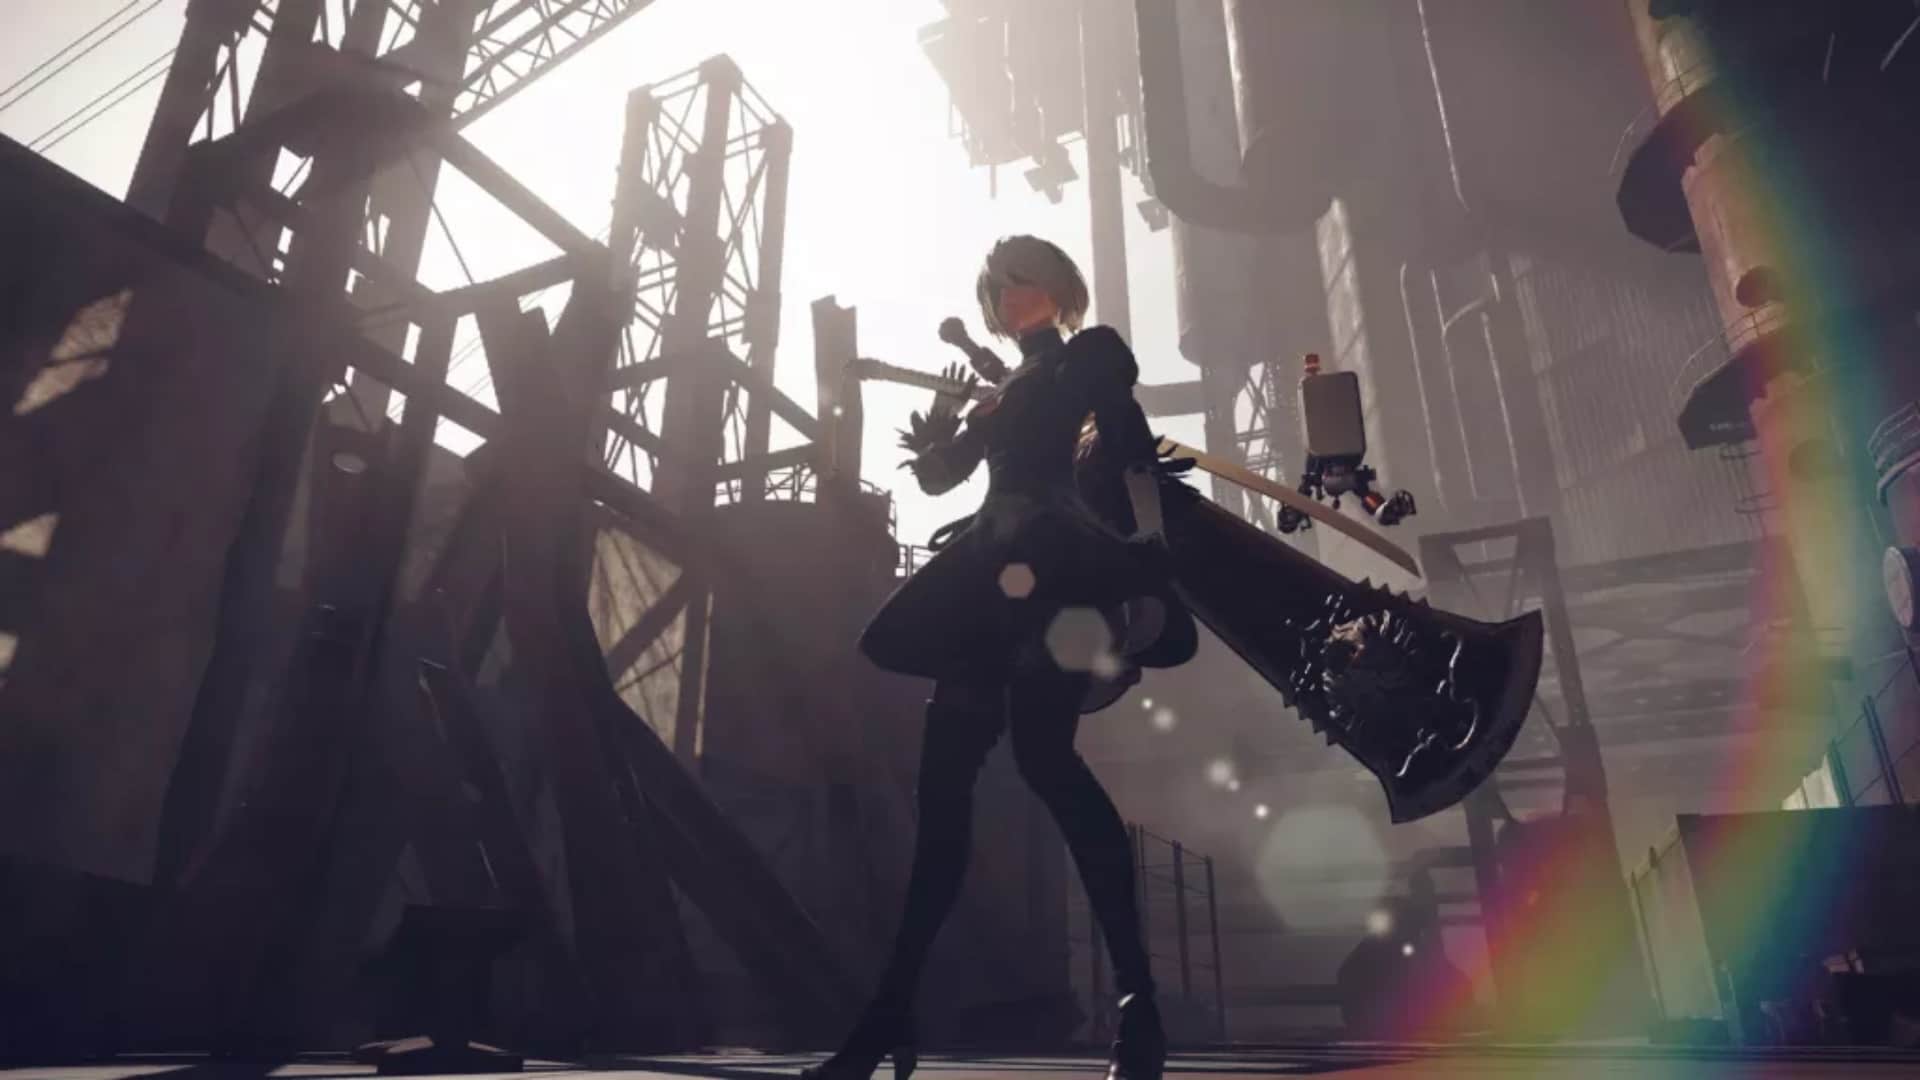 nier-automata-switch-port-promises-30-fps-in-docked-and-handheld-mode-GamersRD